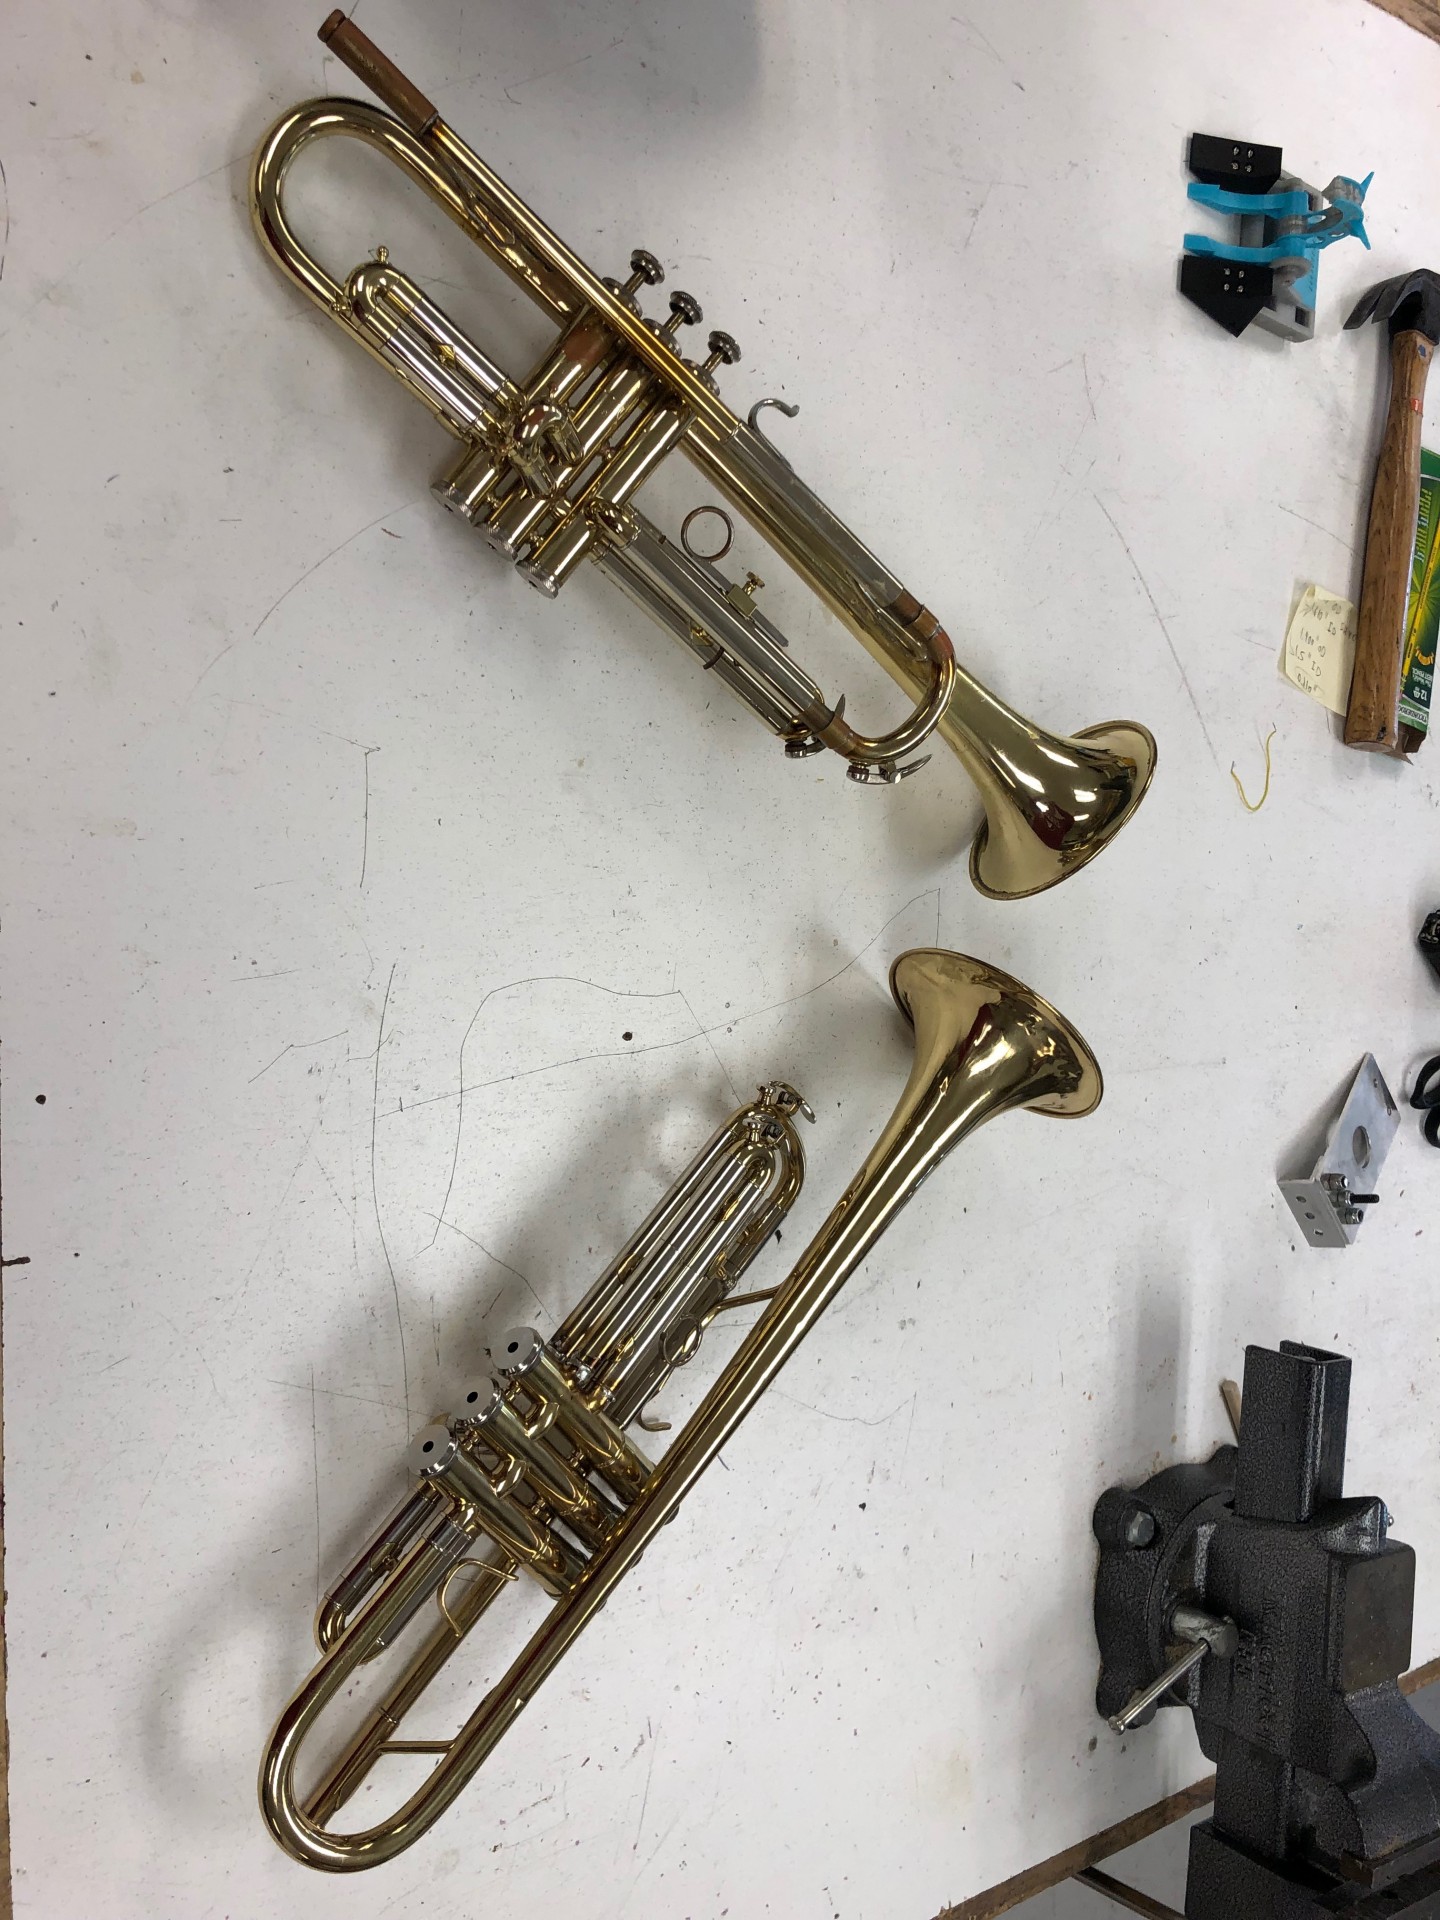 Two finished trumpets!